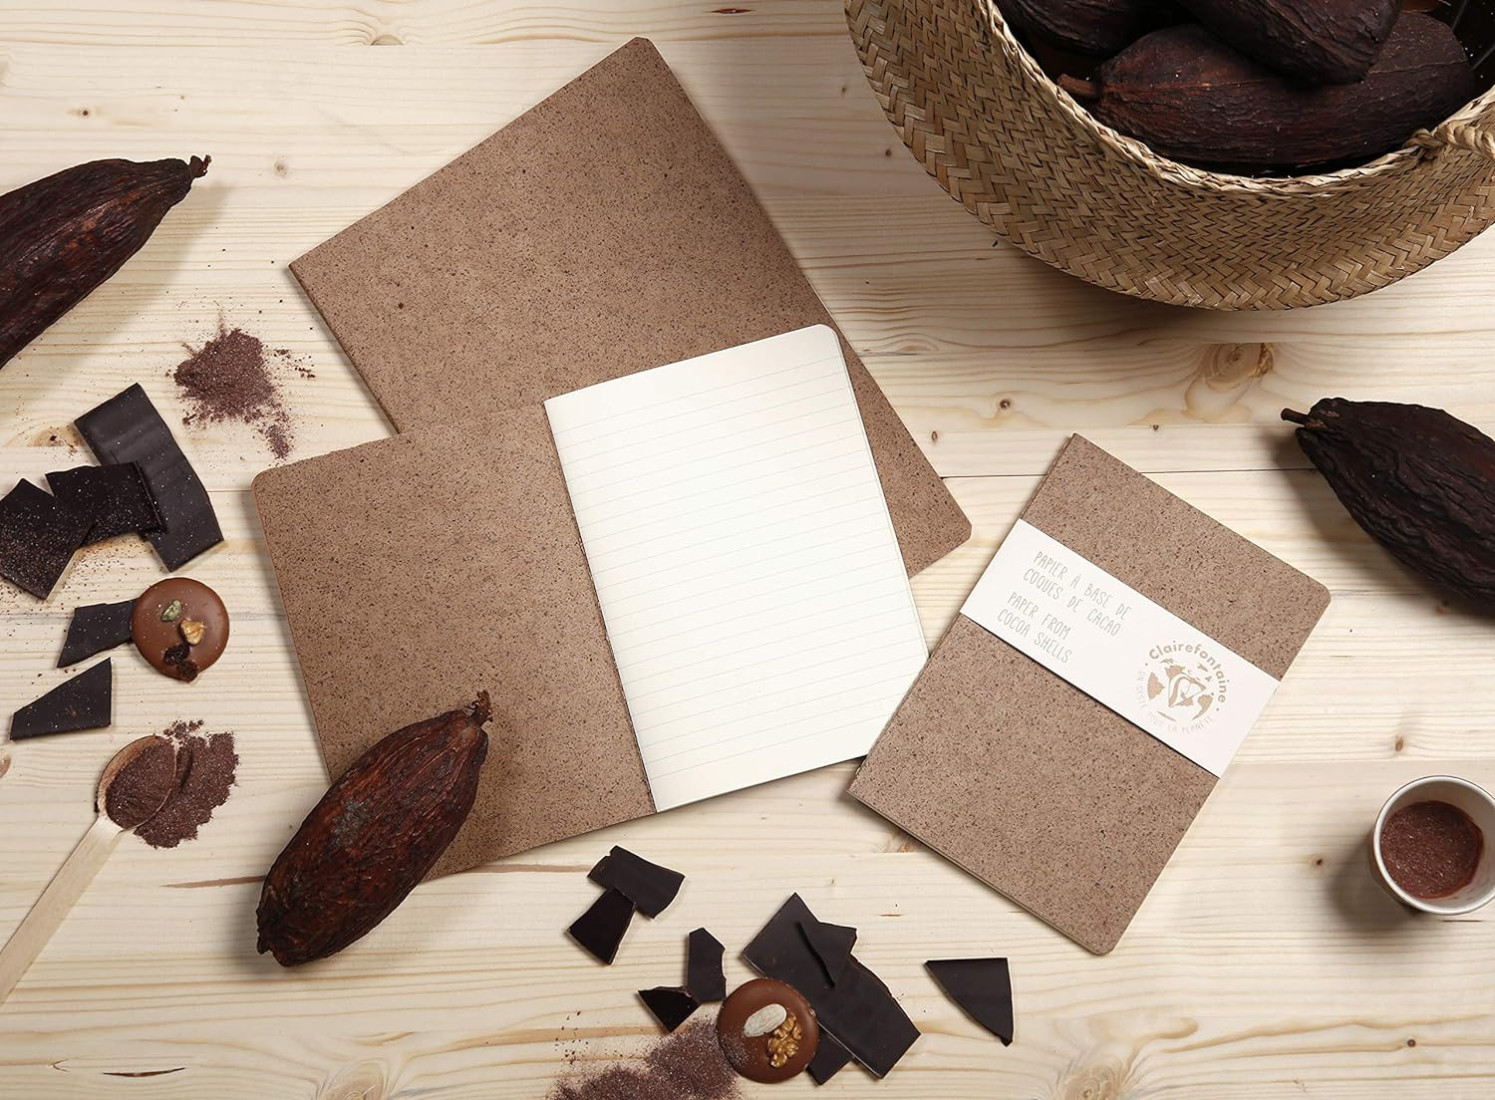 Clairefontaine Rhodia 83524C - A Piqué Sewn Notebook Cover Paper made from Cocoa Shells - A5 14.8x21 cm 96 Lined Pages 90g Ivory Paper - With Flap - Jeans&Cocoa Collection